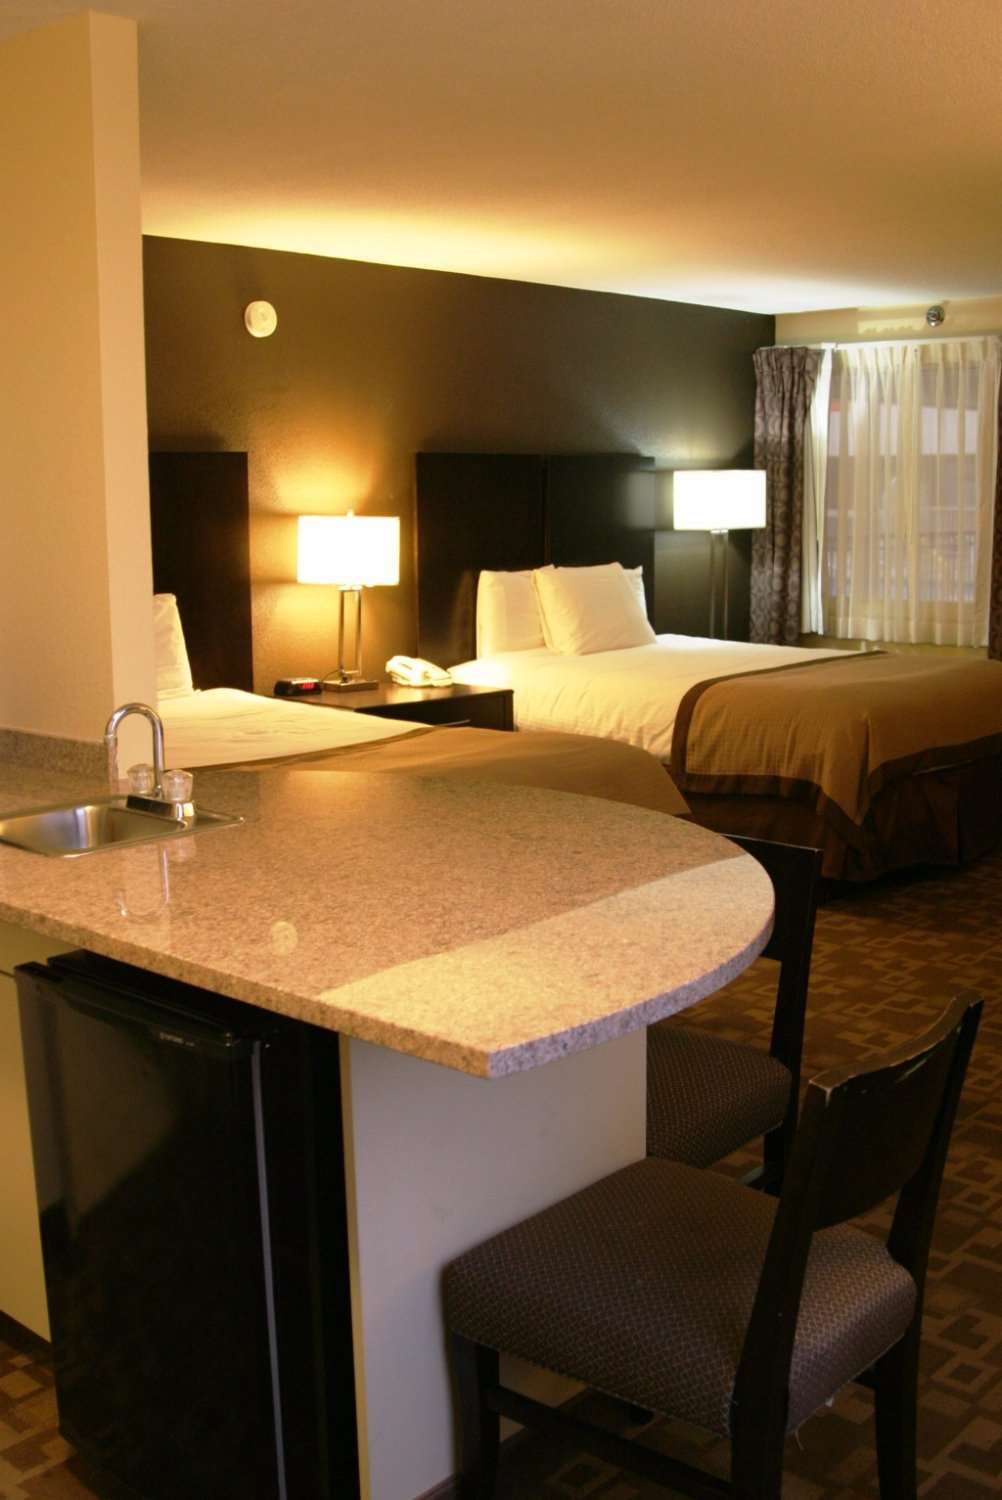 Best Western Rochester Hotel Mayo Clinic Area/St. Mary's